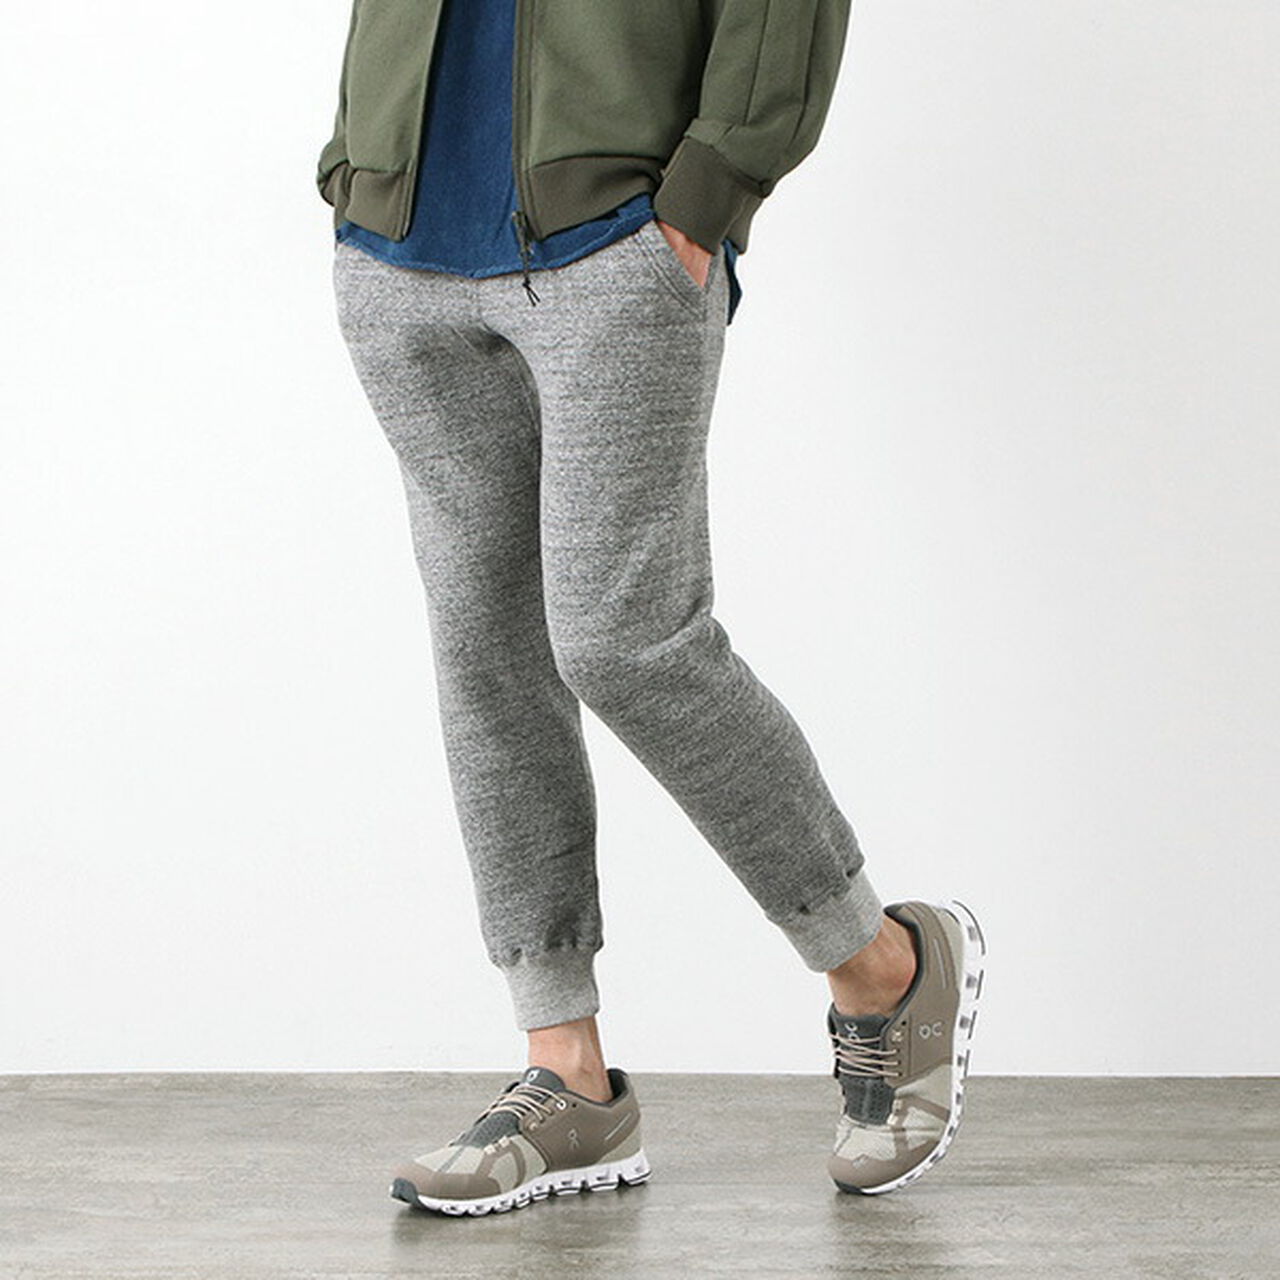 Longbeach Cropped Pants,Grey, large image number 0